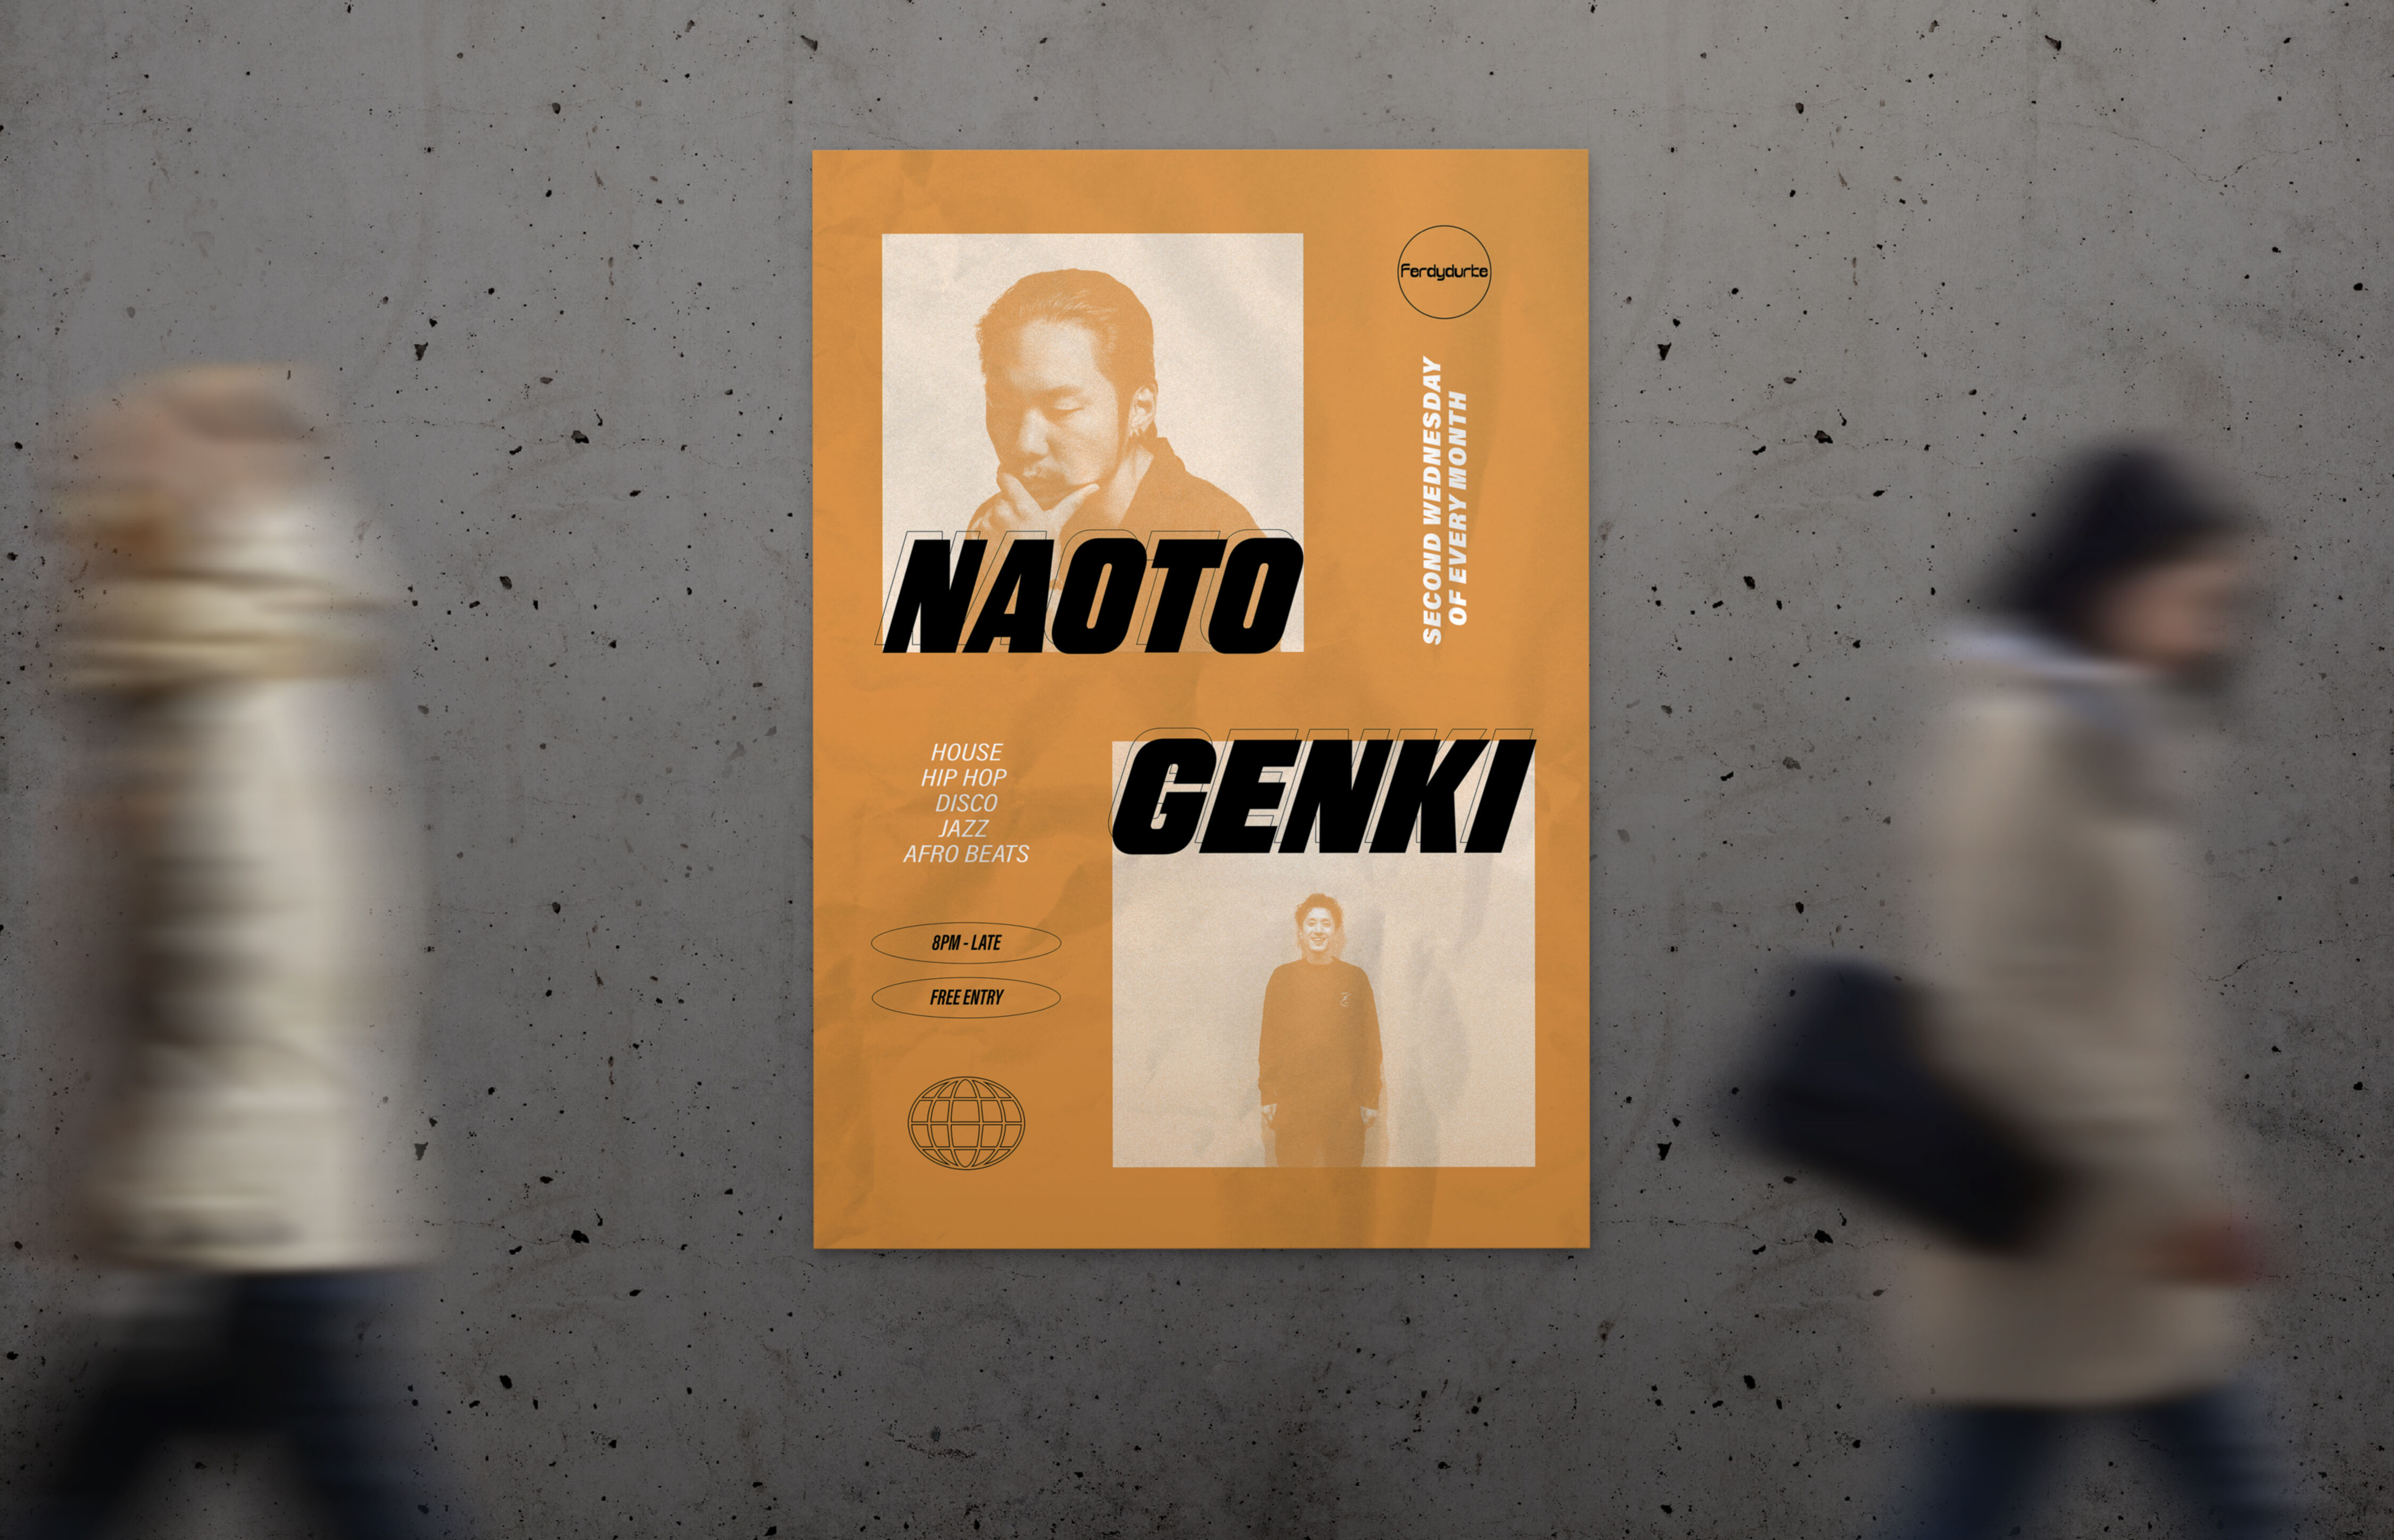 An orange poster affixed to a concrete wall advertises "NAOTO GENKI", featuring genres like House, Hip Hop, and Afro Beats.